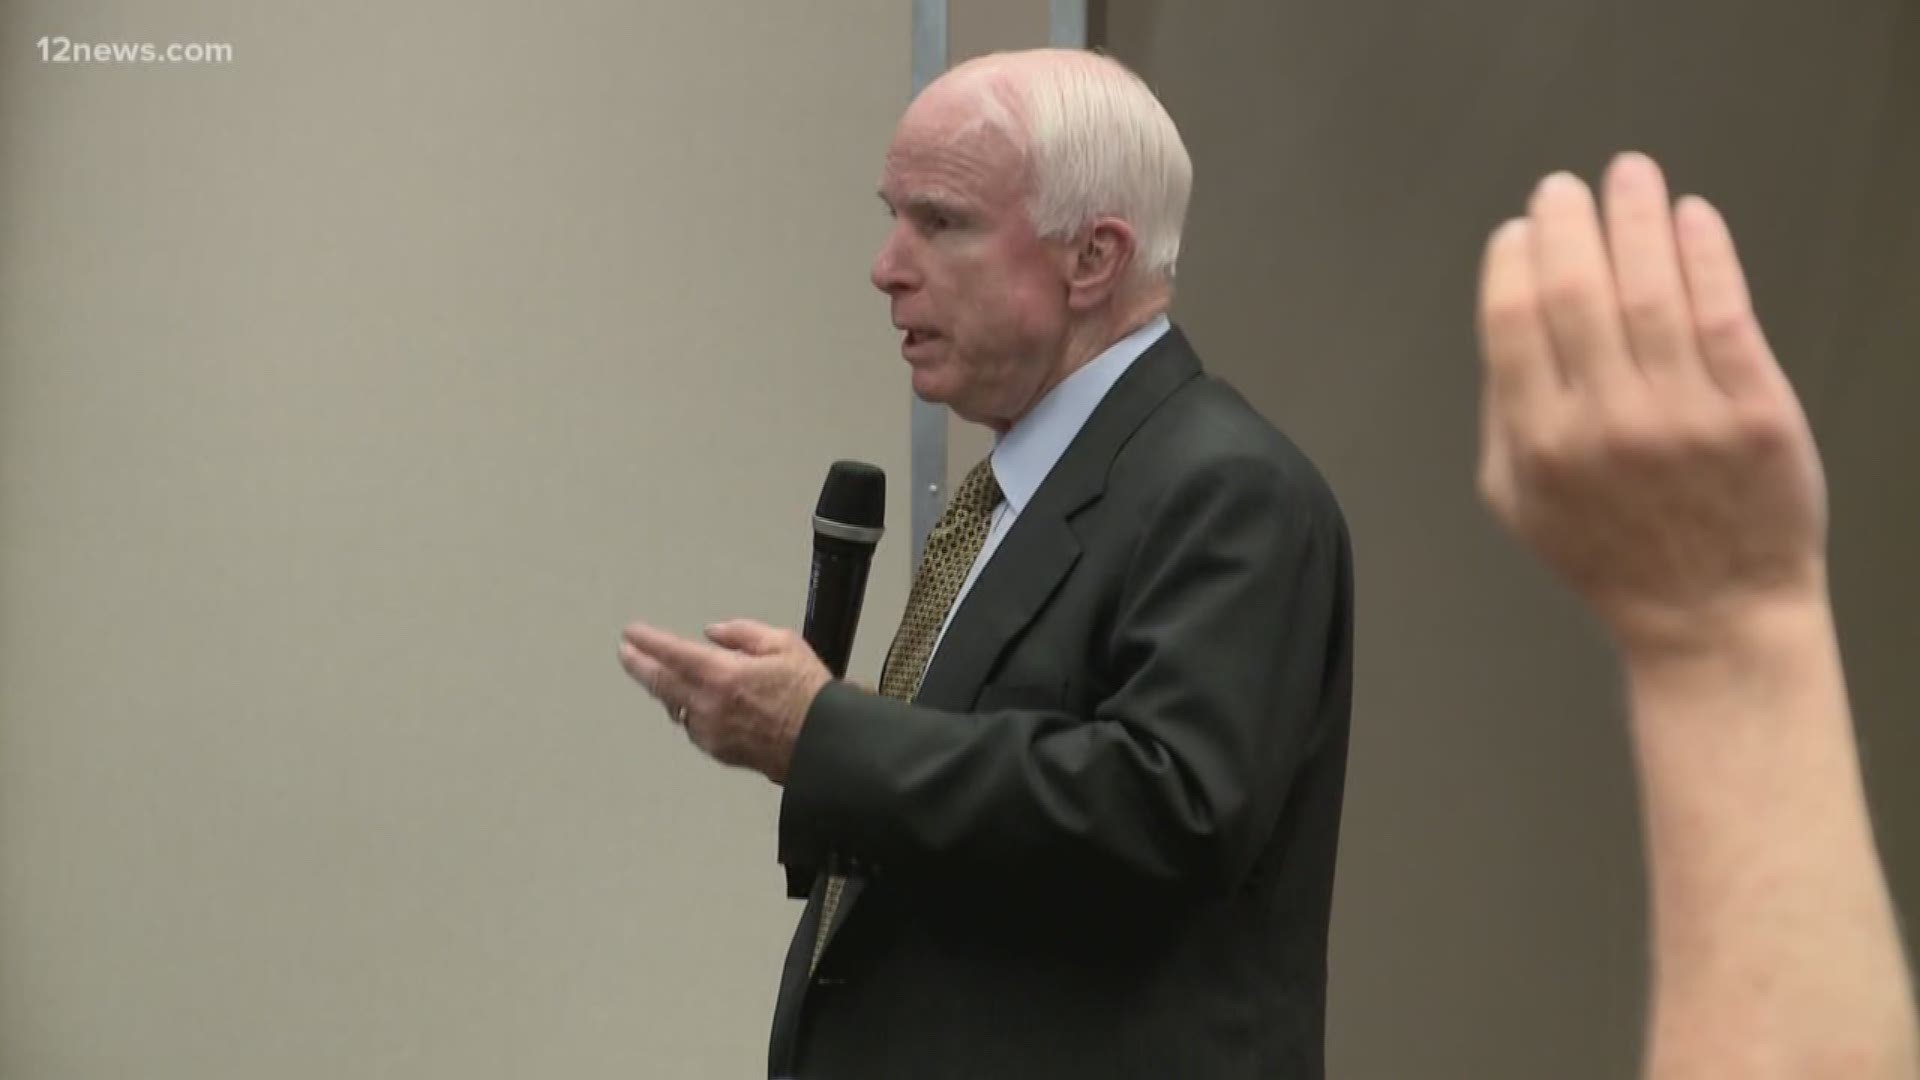 The McCain family released a statement Friday morning saying the senior Arizona senator was ending treatment for his brain cancer.